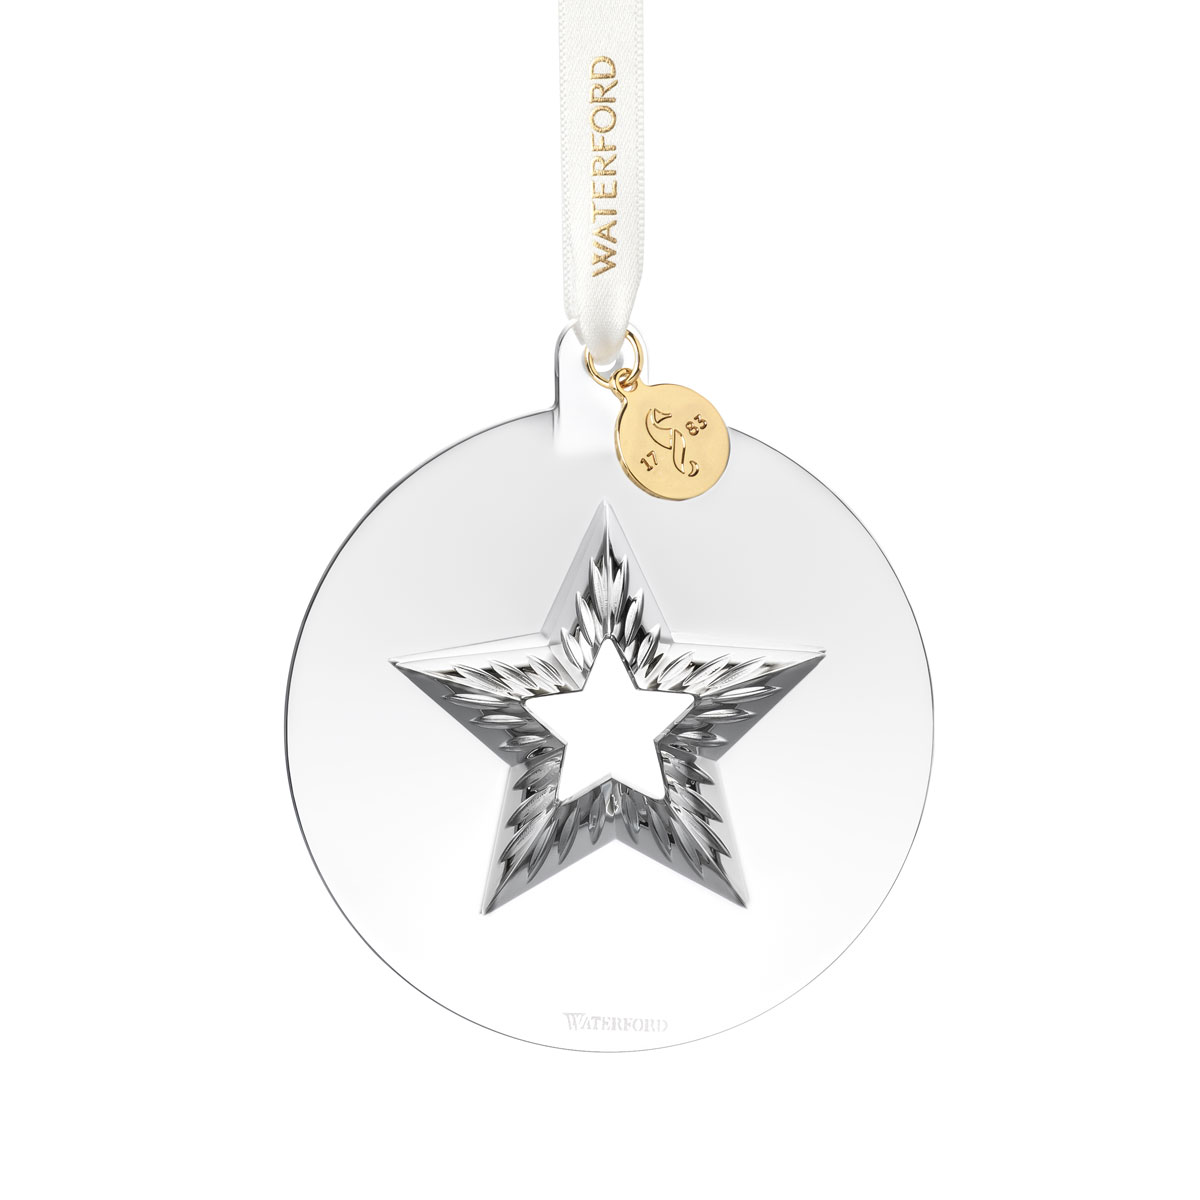 Waterford Crystal 2022 Star Ornament